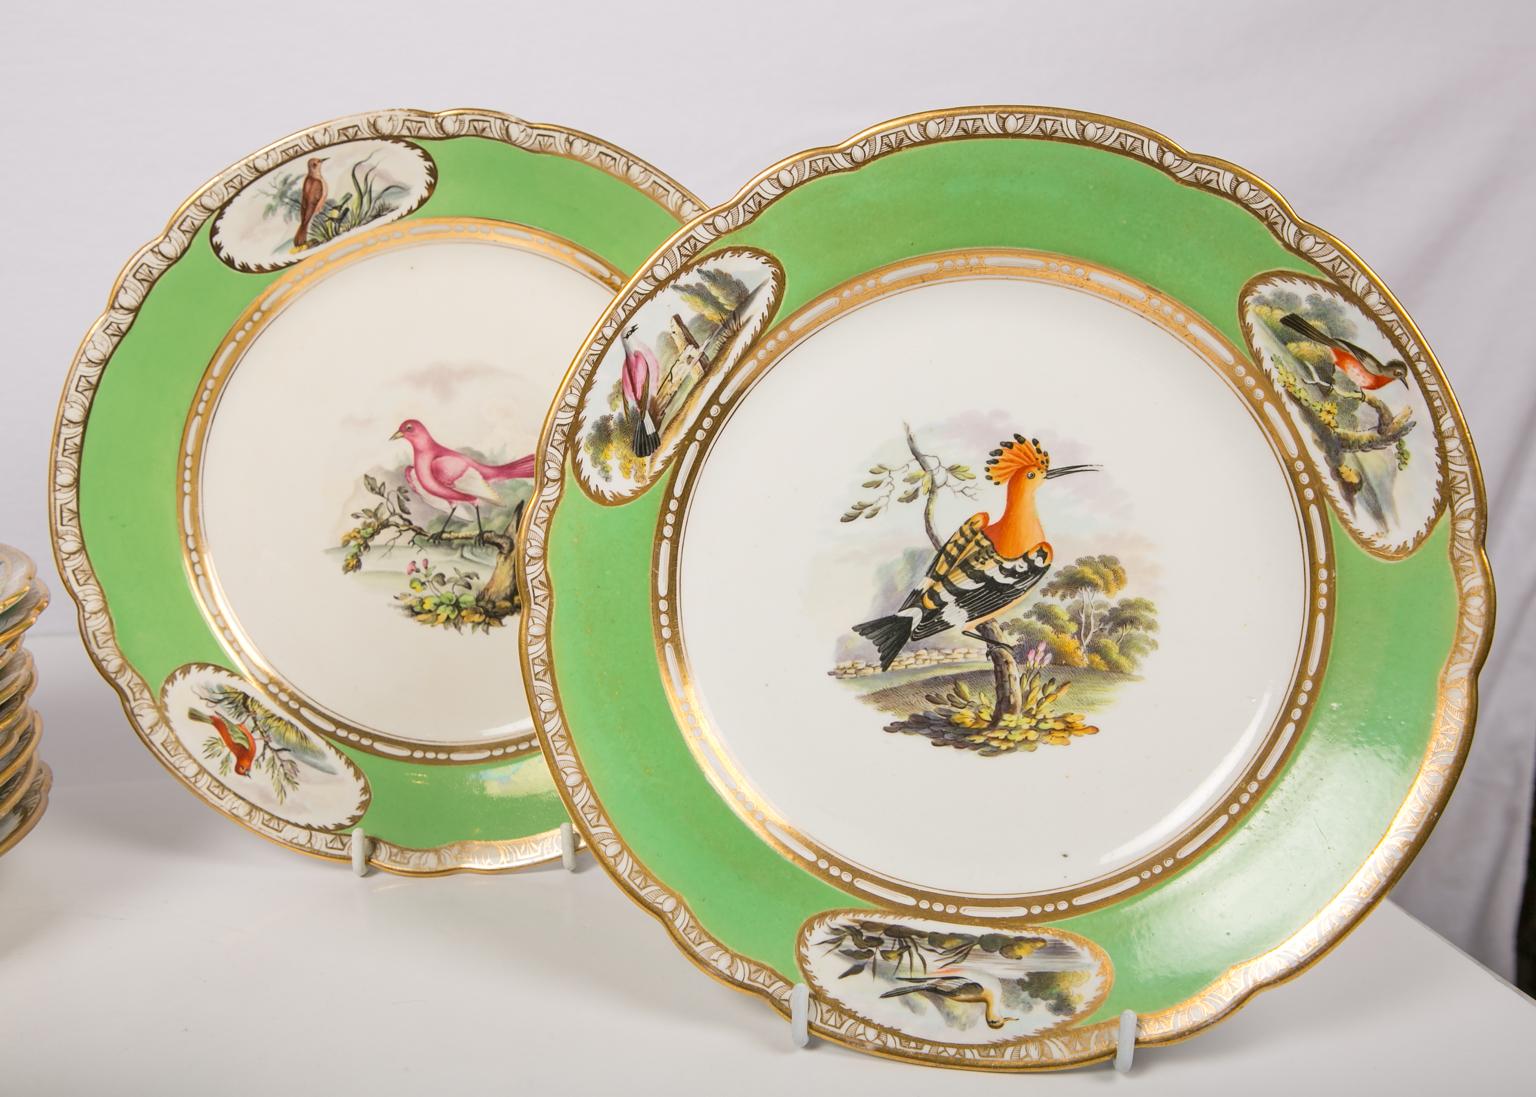 English Bird Lover's Set Antique Porcelain Dishes Hand Painted Apple Green Borders